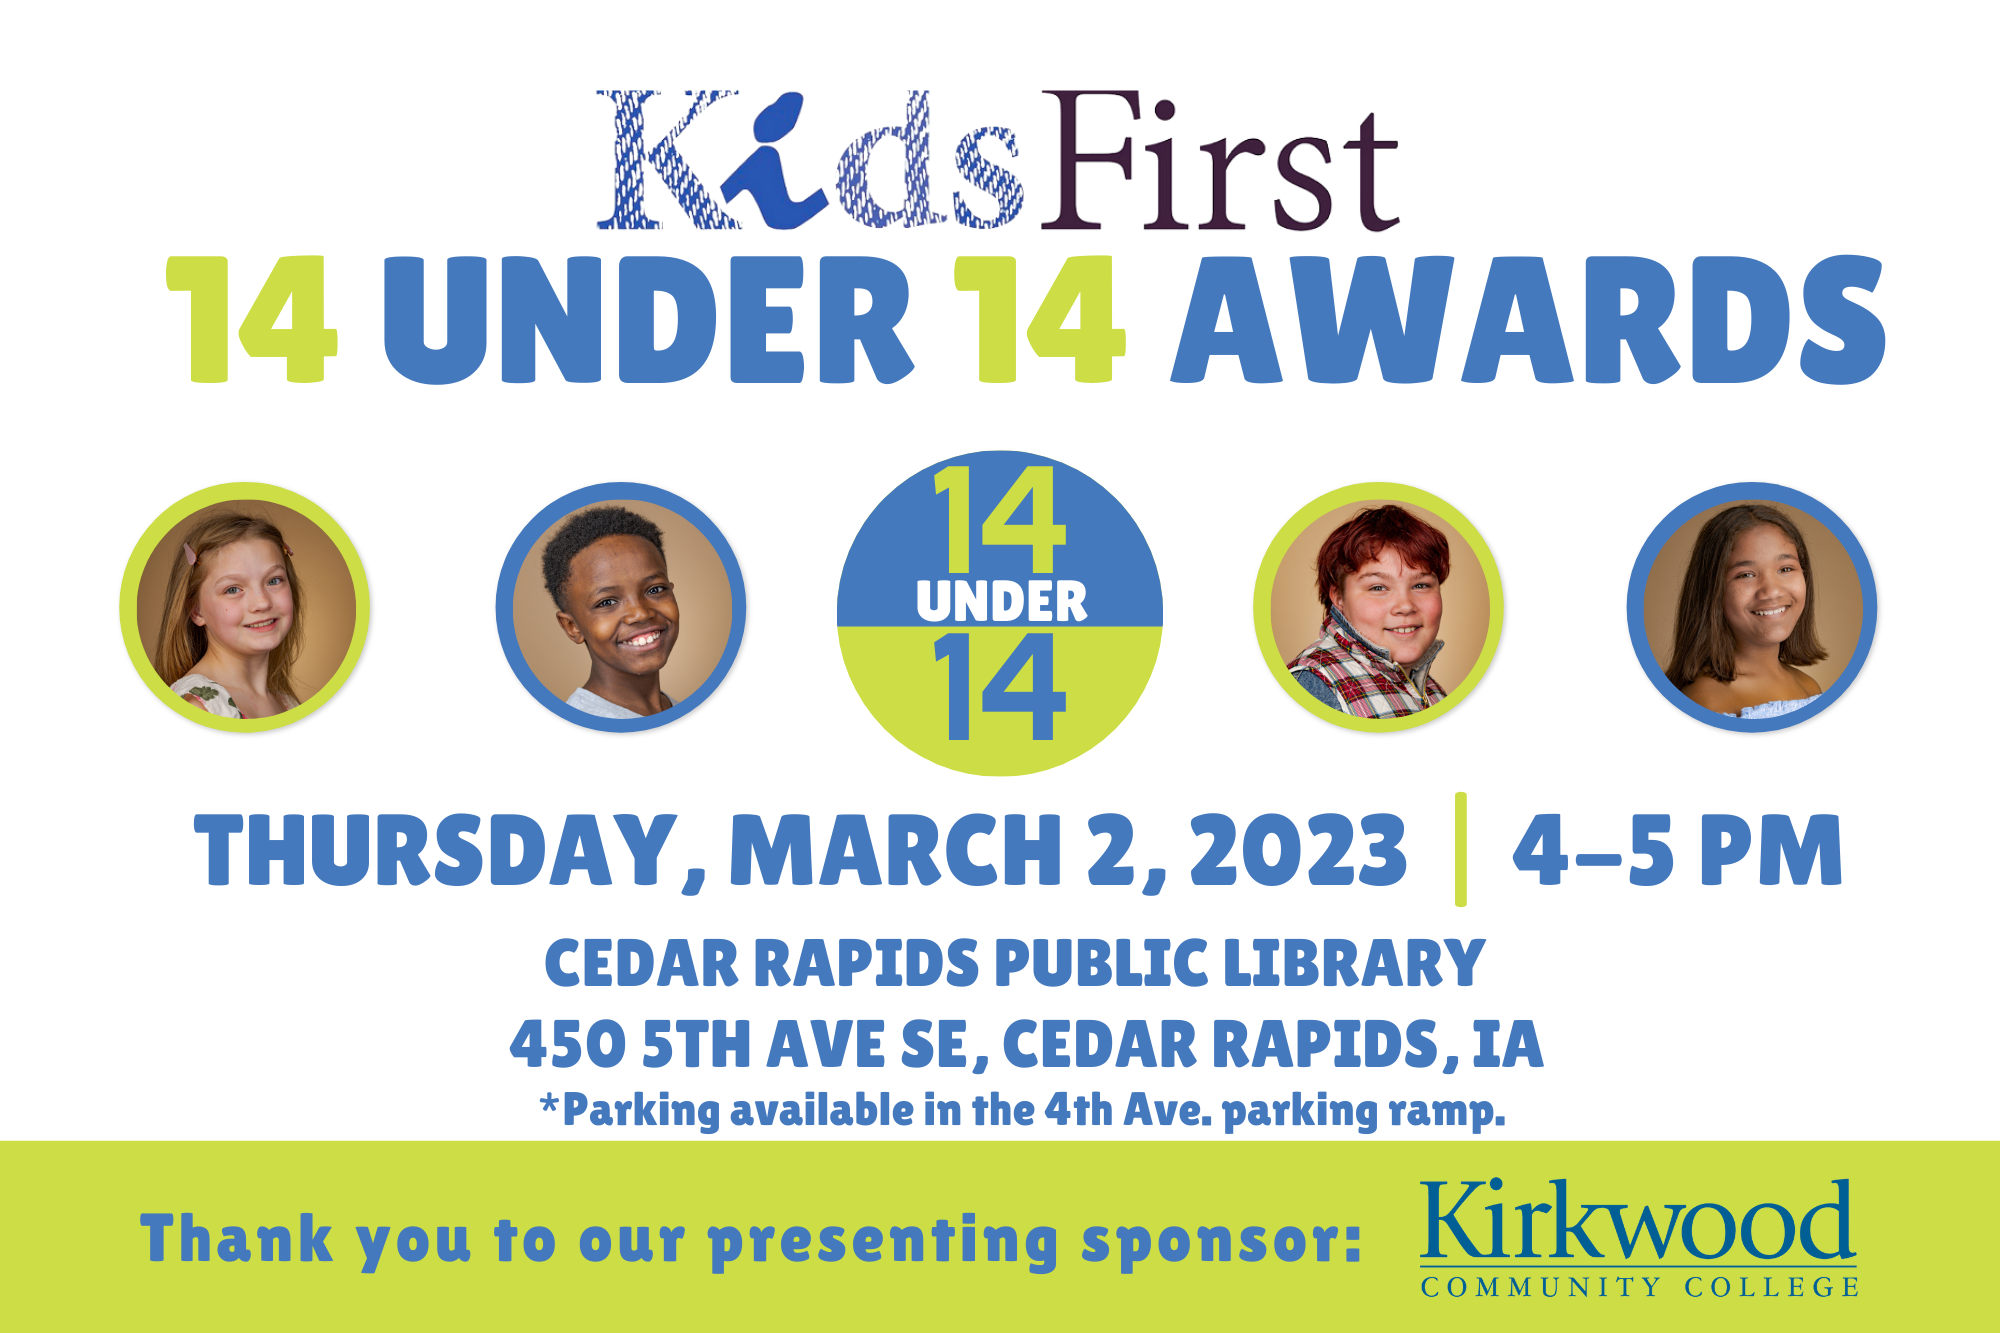 The 14 Under 14 Awards are back!